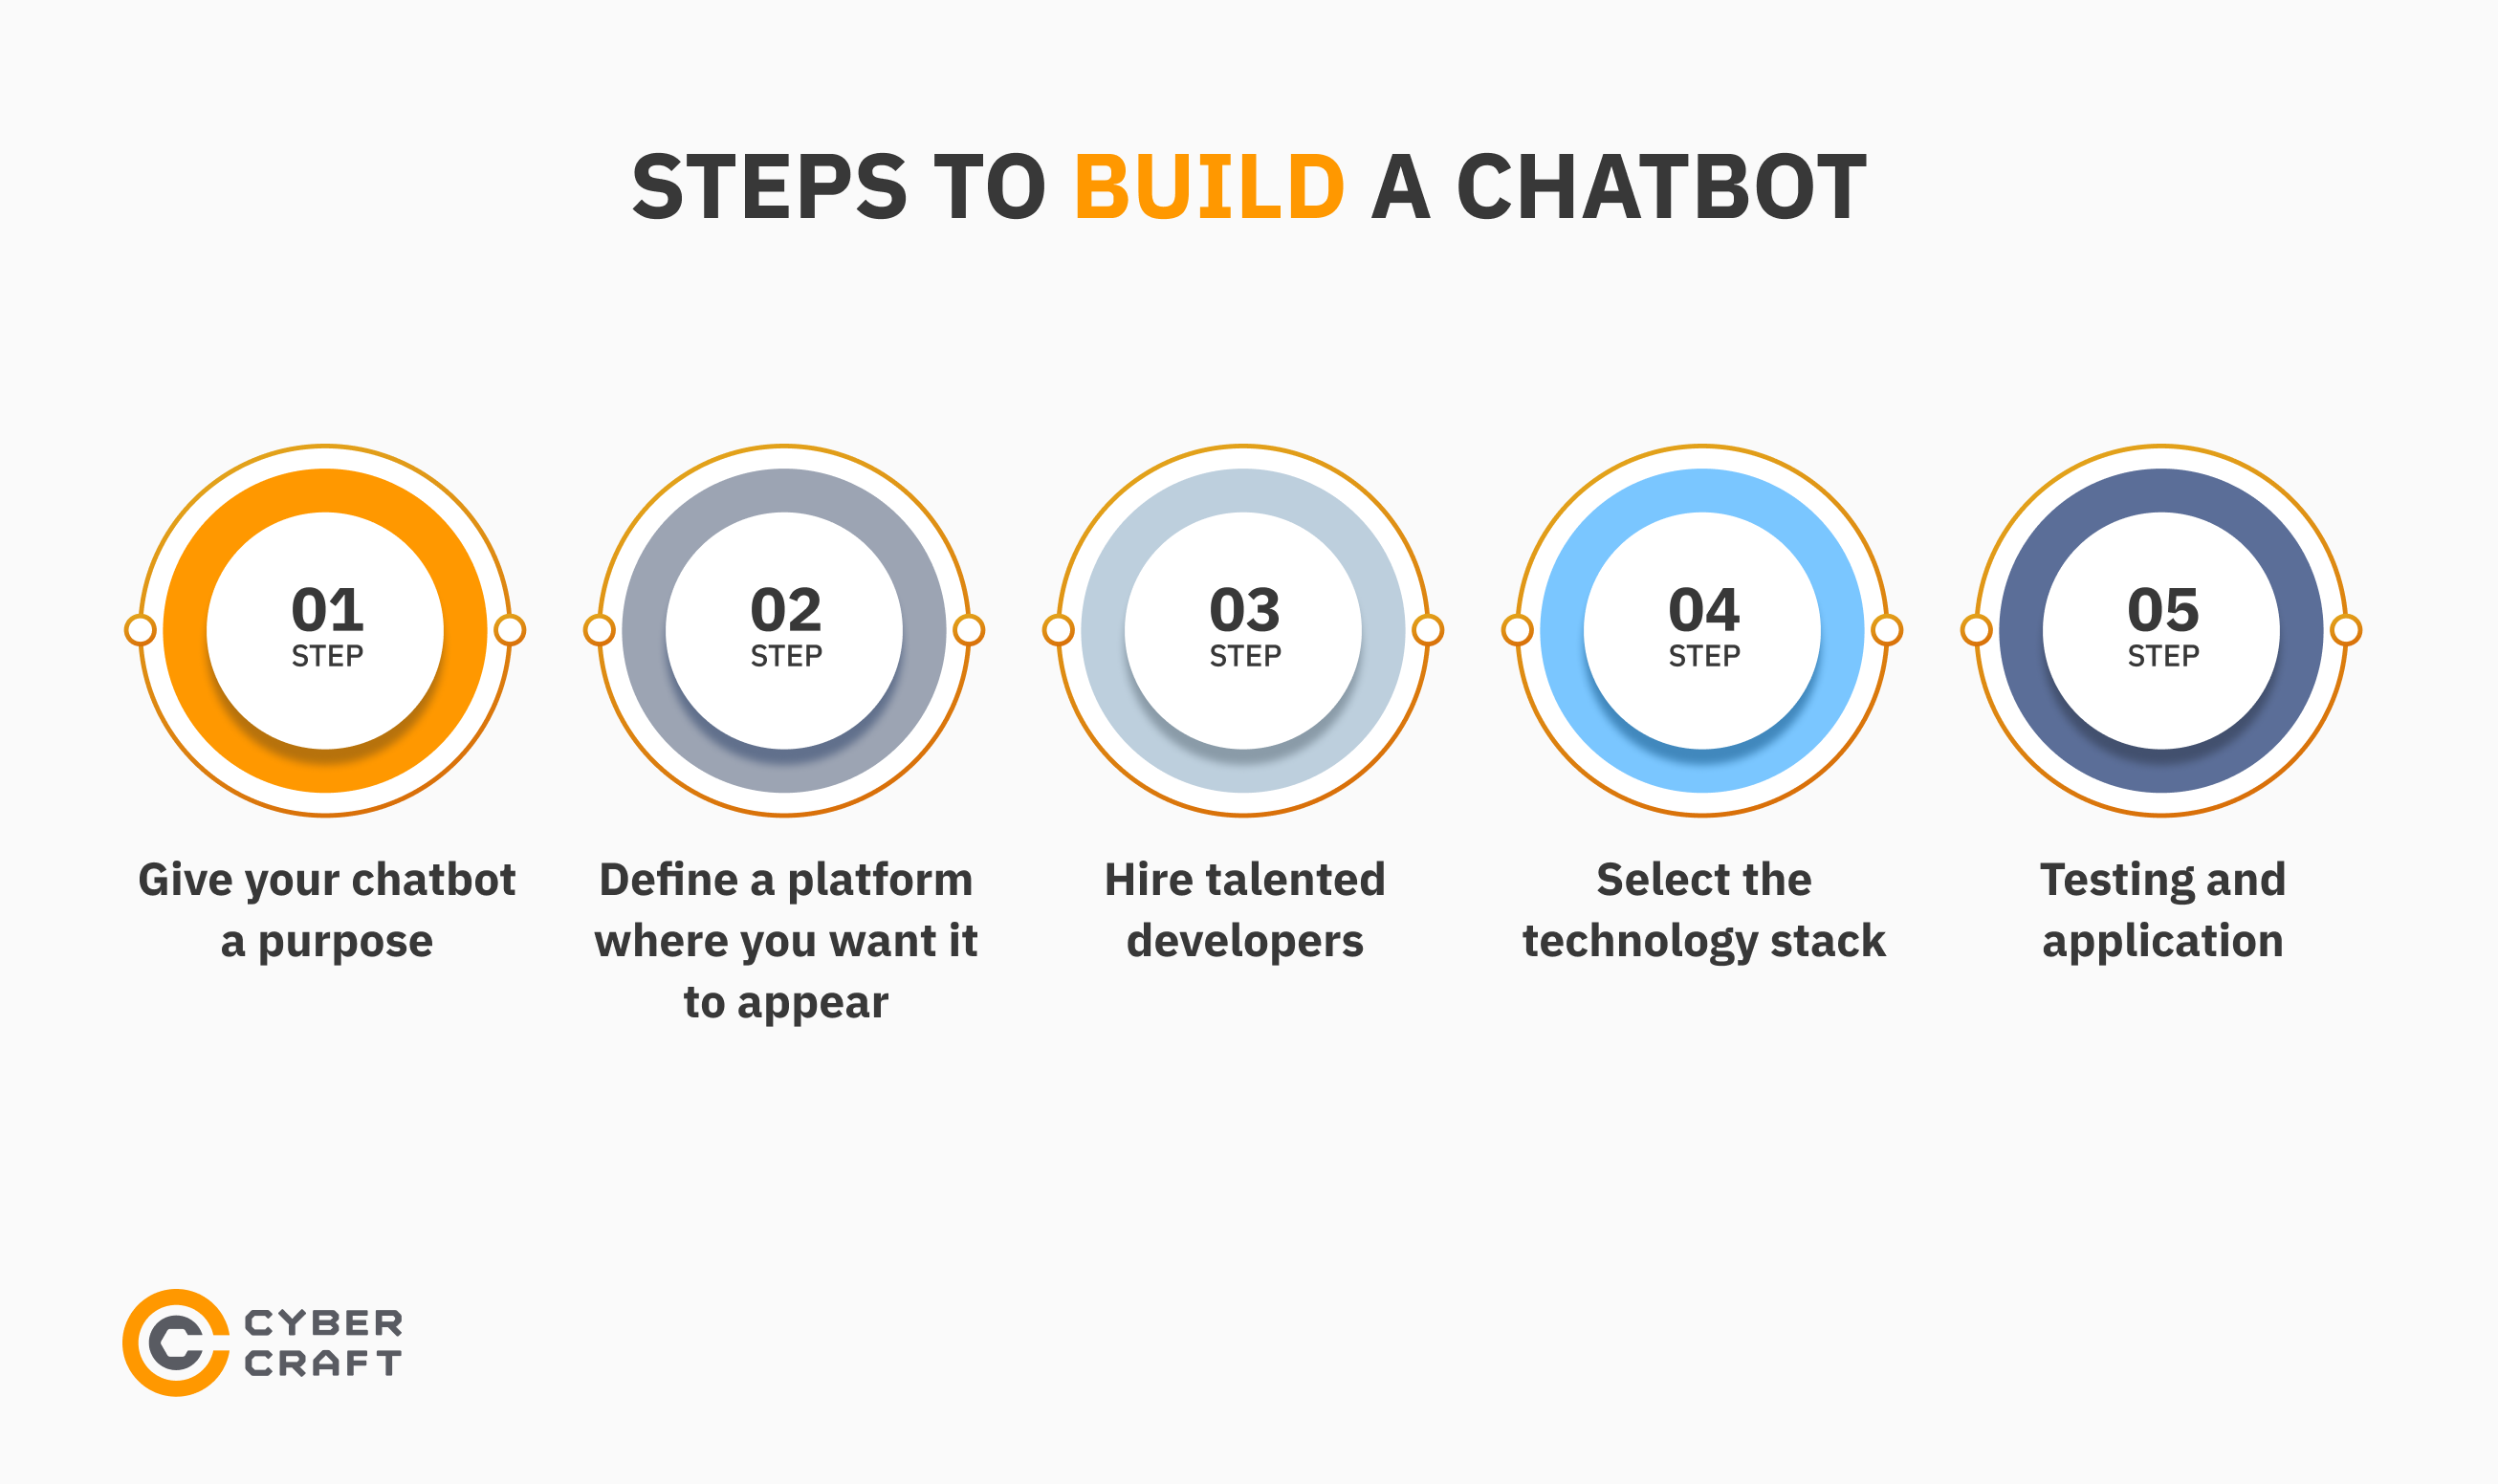 Create a Chatbot Step-by-Step